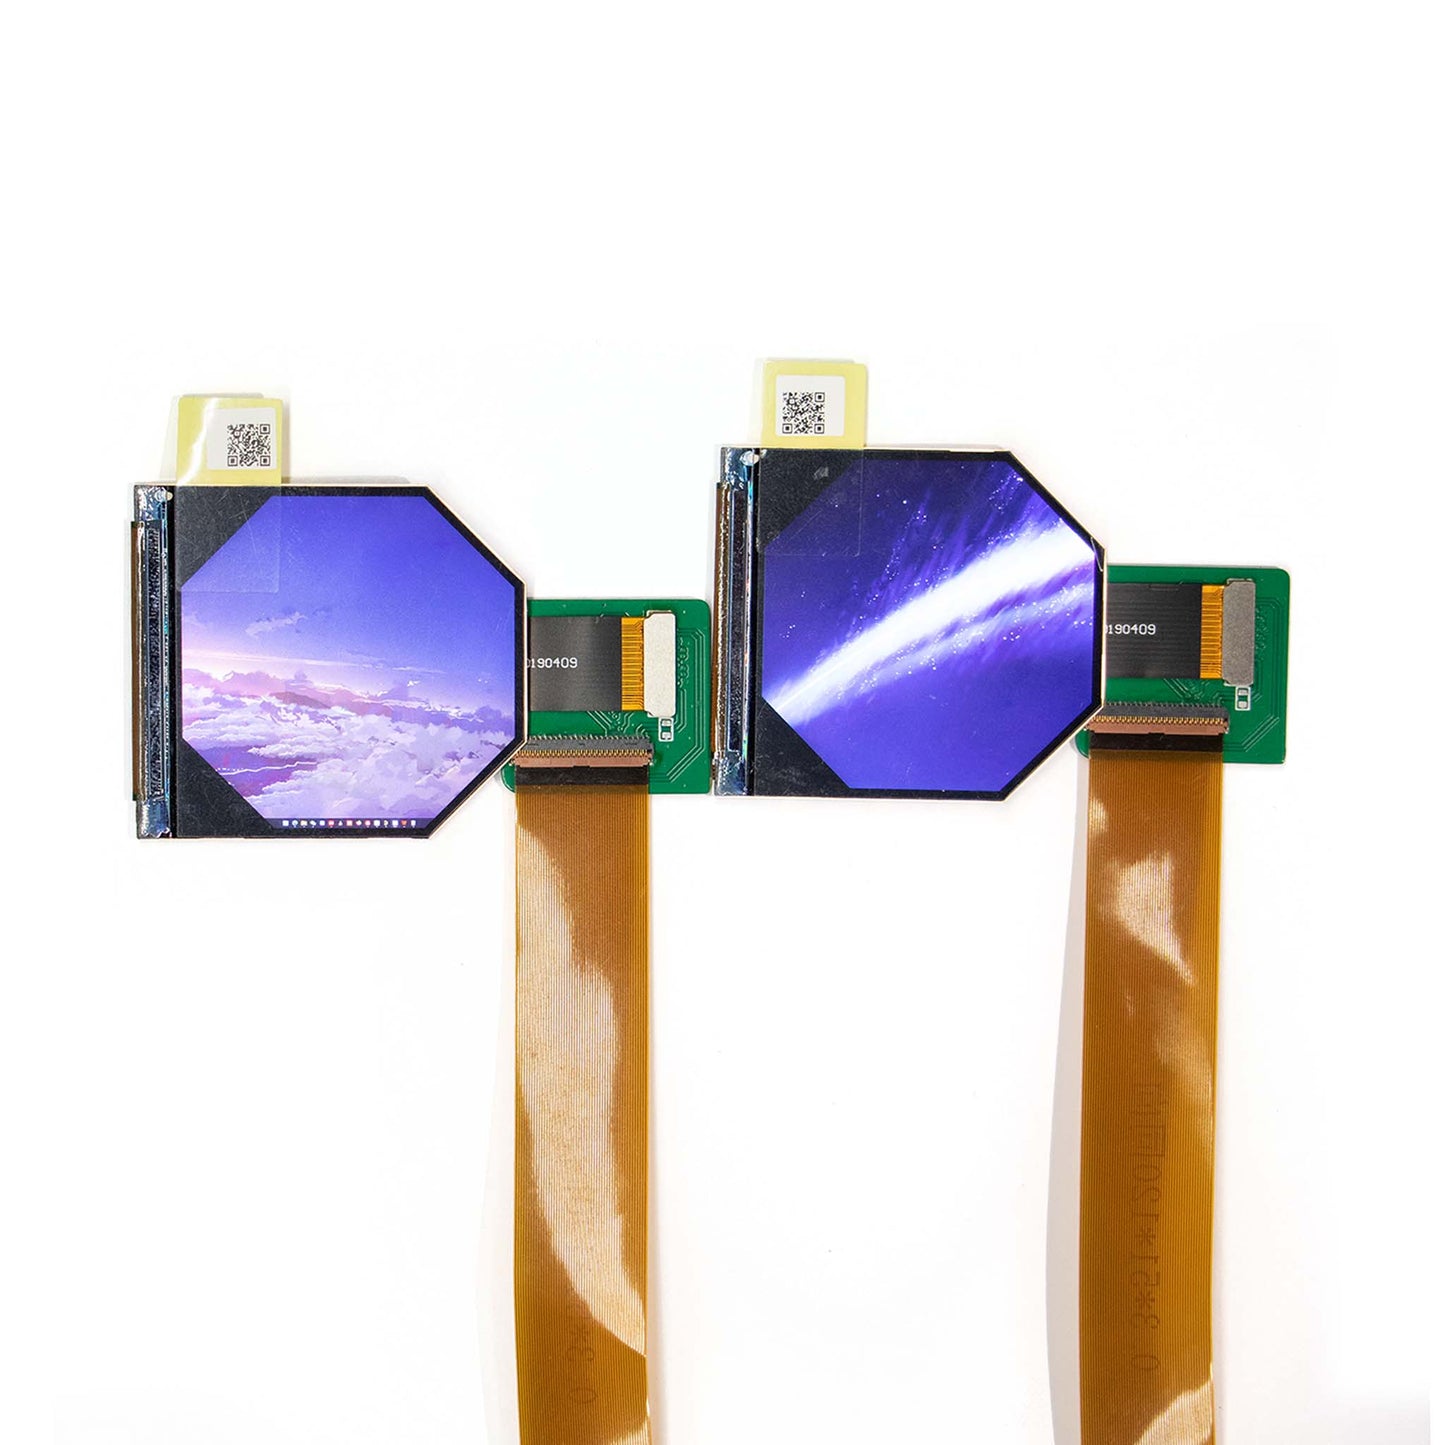  Two 2.1 inch TFT Micro Display Panel designed for VR with 1600x1600 resolution and 1058ppi